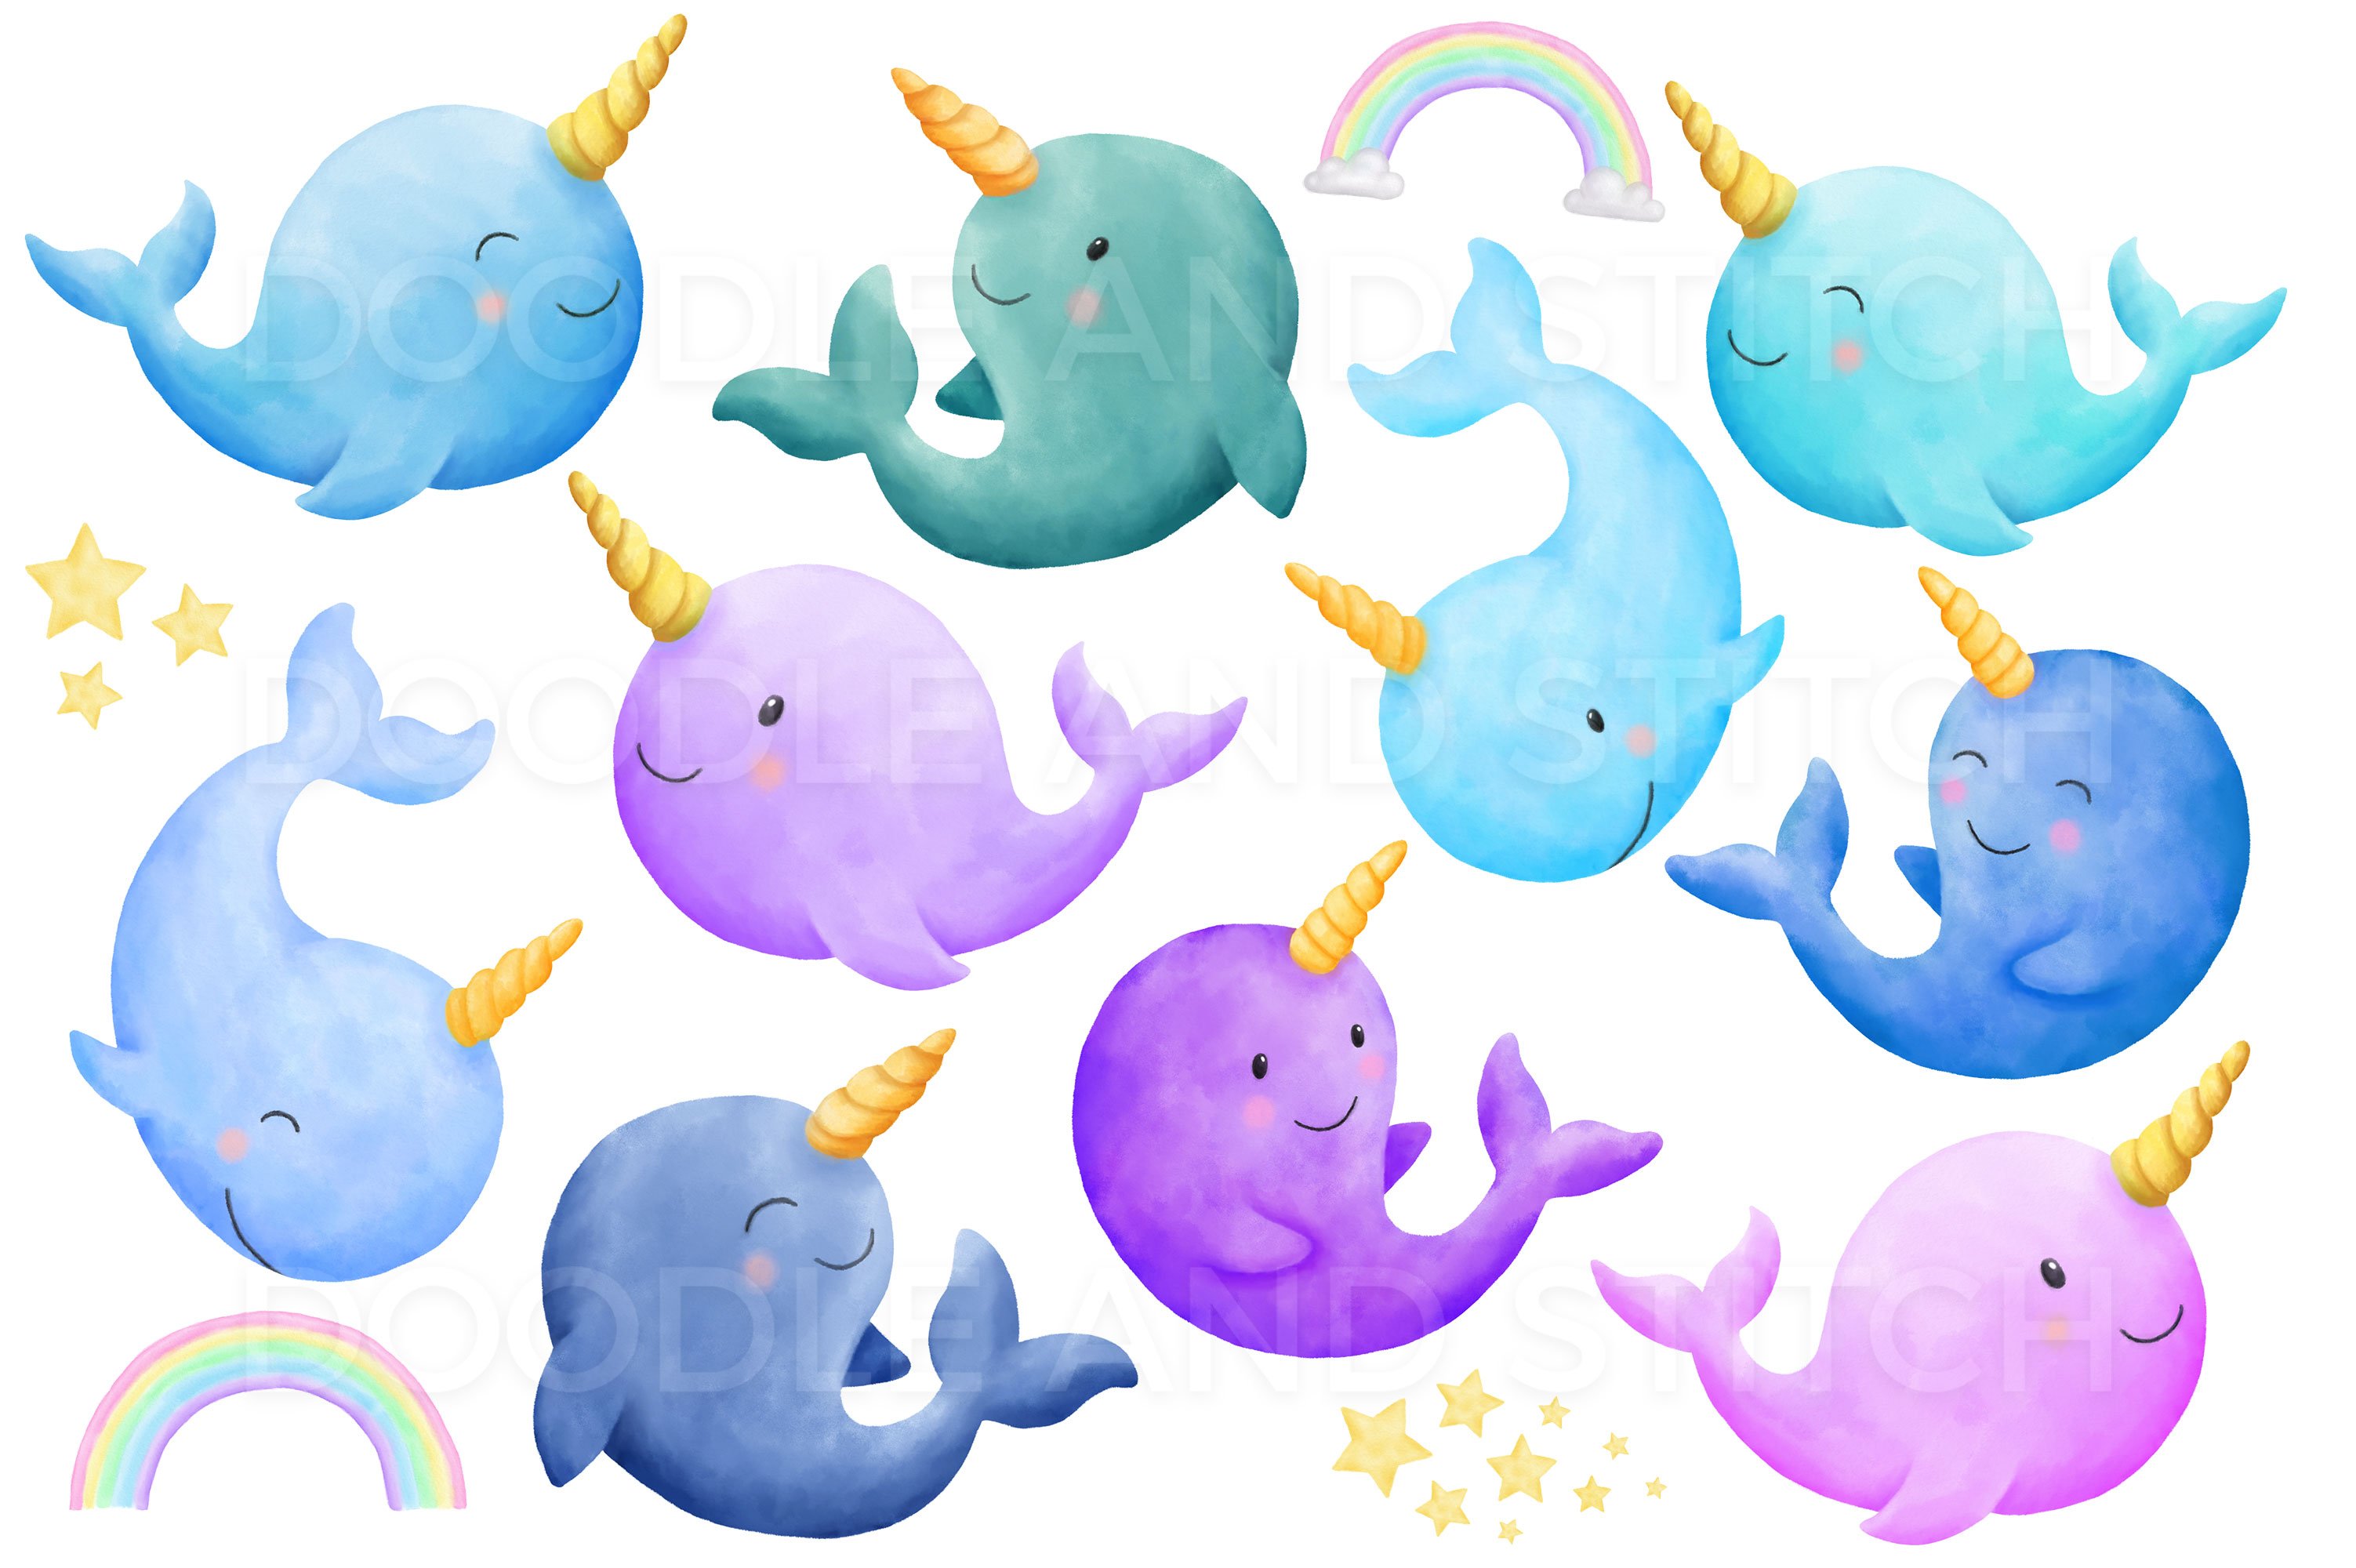 Narwhal Watercolor Illustrations preview image.